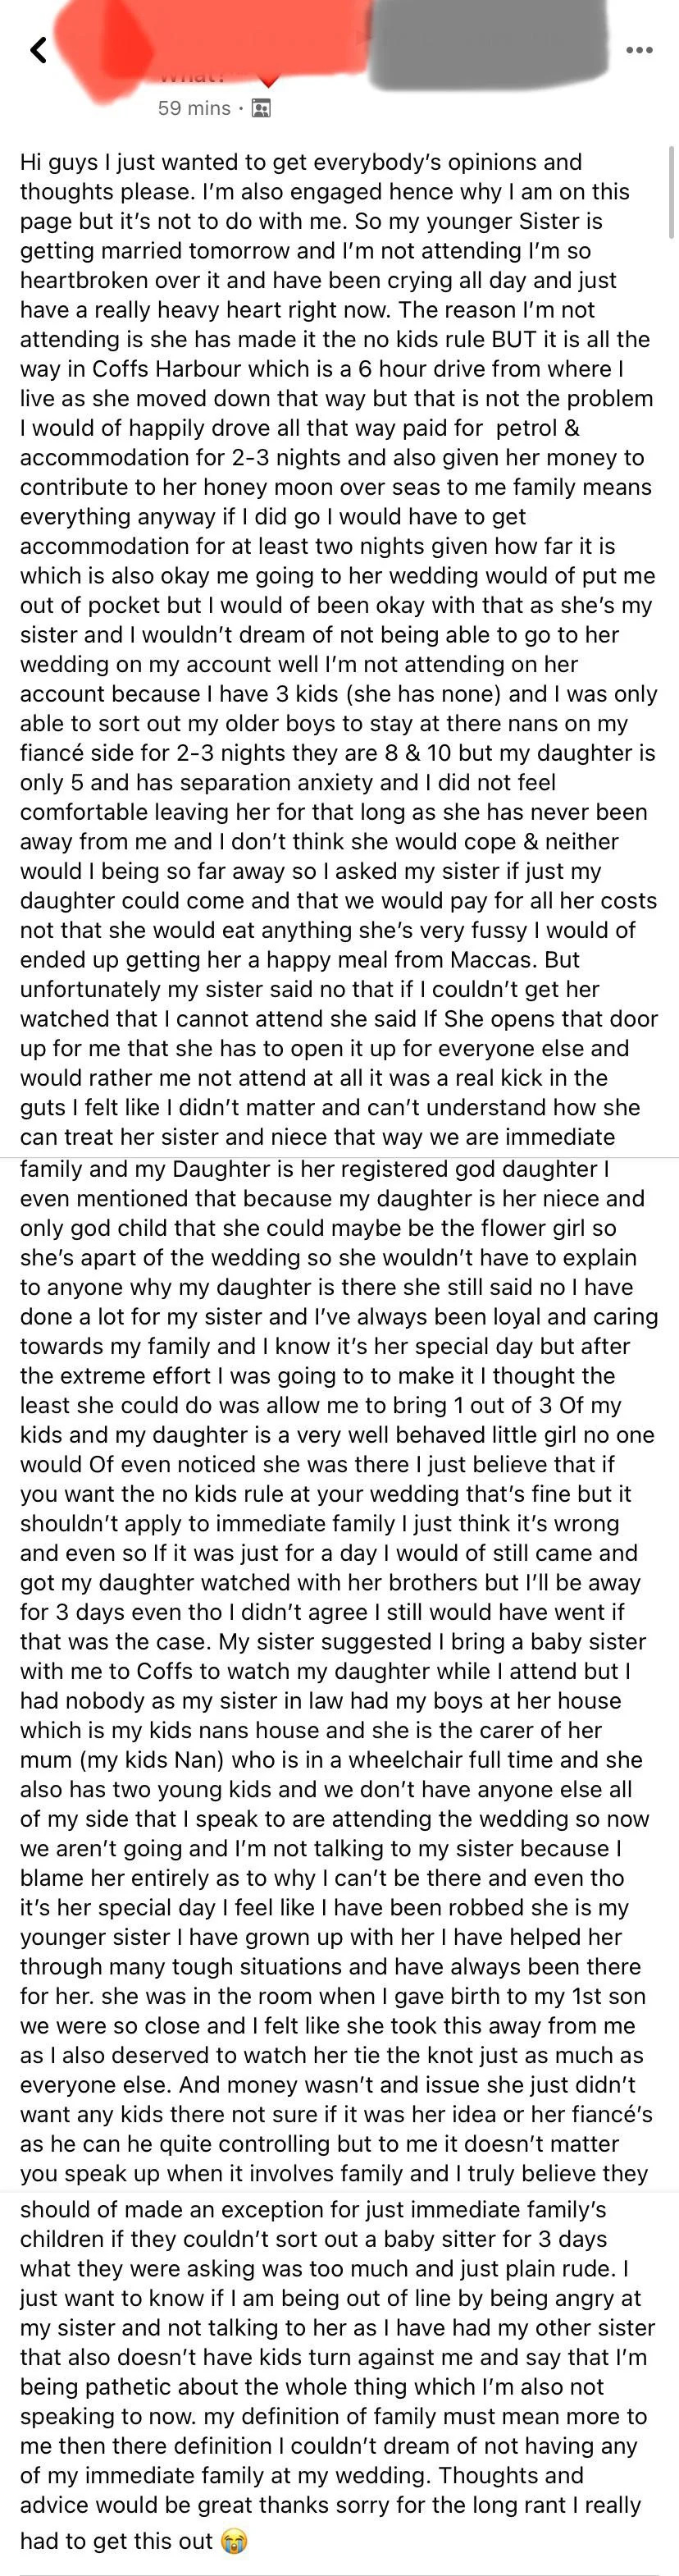 A very long rant in which a woman makes herself out to be the victim because she can&#x27;t go to her sister&#x27;s childless wedding, when she&#x27;s the one who won&#x27;t leave one of her children with a babysitter